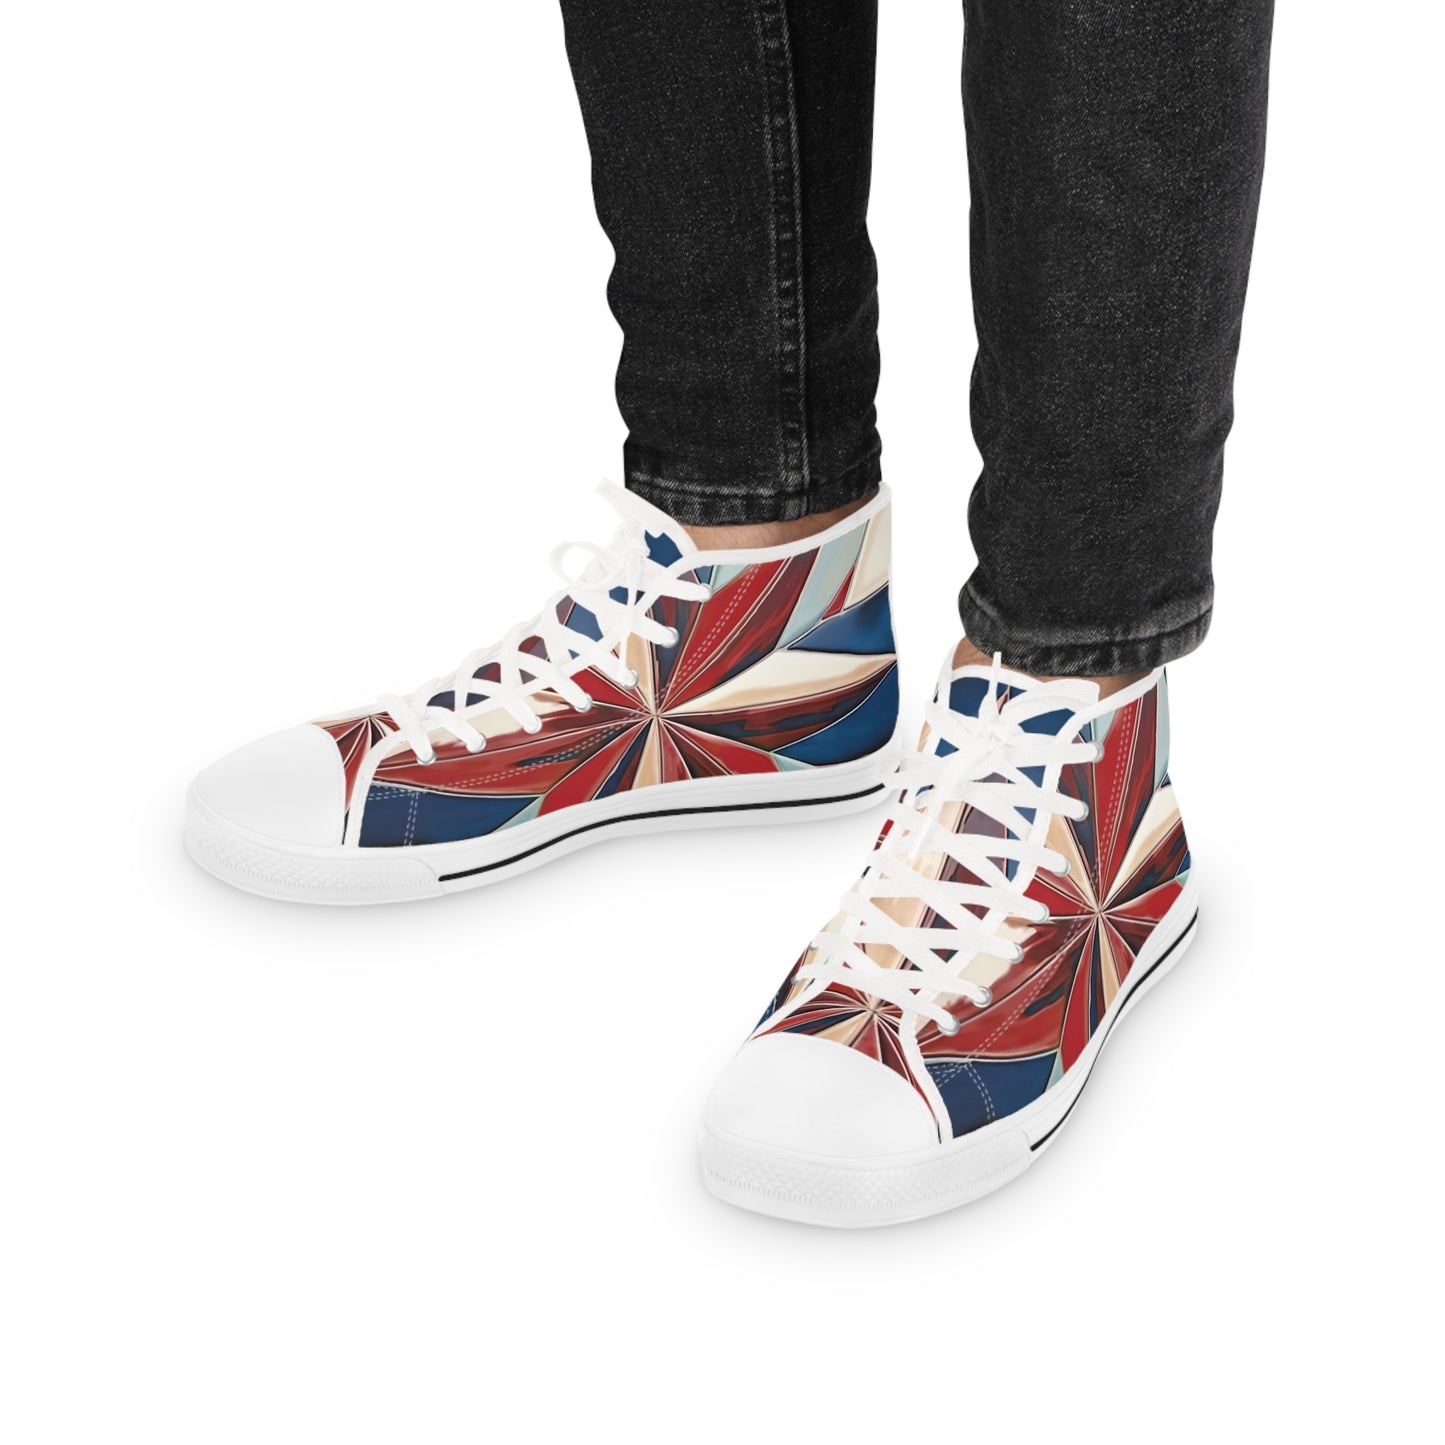 Beautiful Stars Abstract Star Style Red, White, And Blue Men's High Top Sneakers